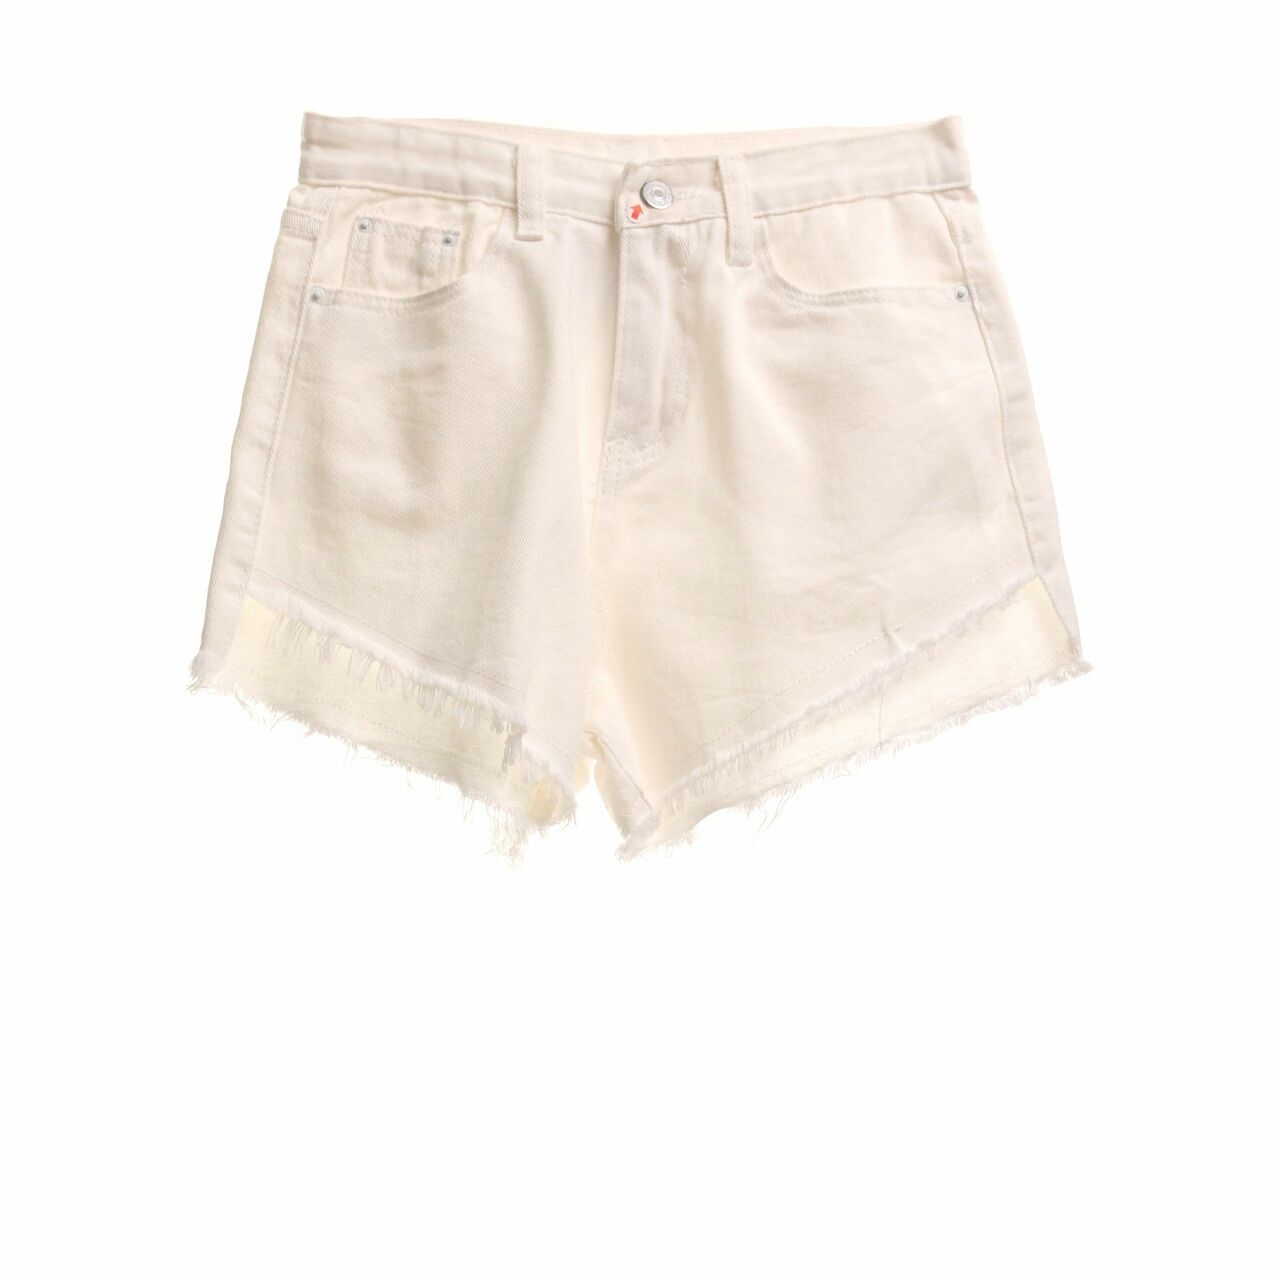 Private White Ripped Jeans Short Pants